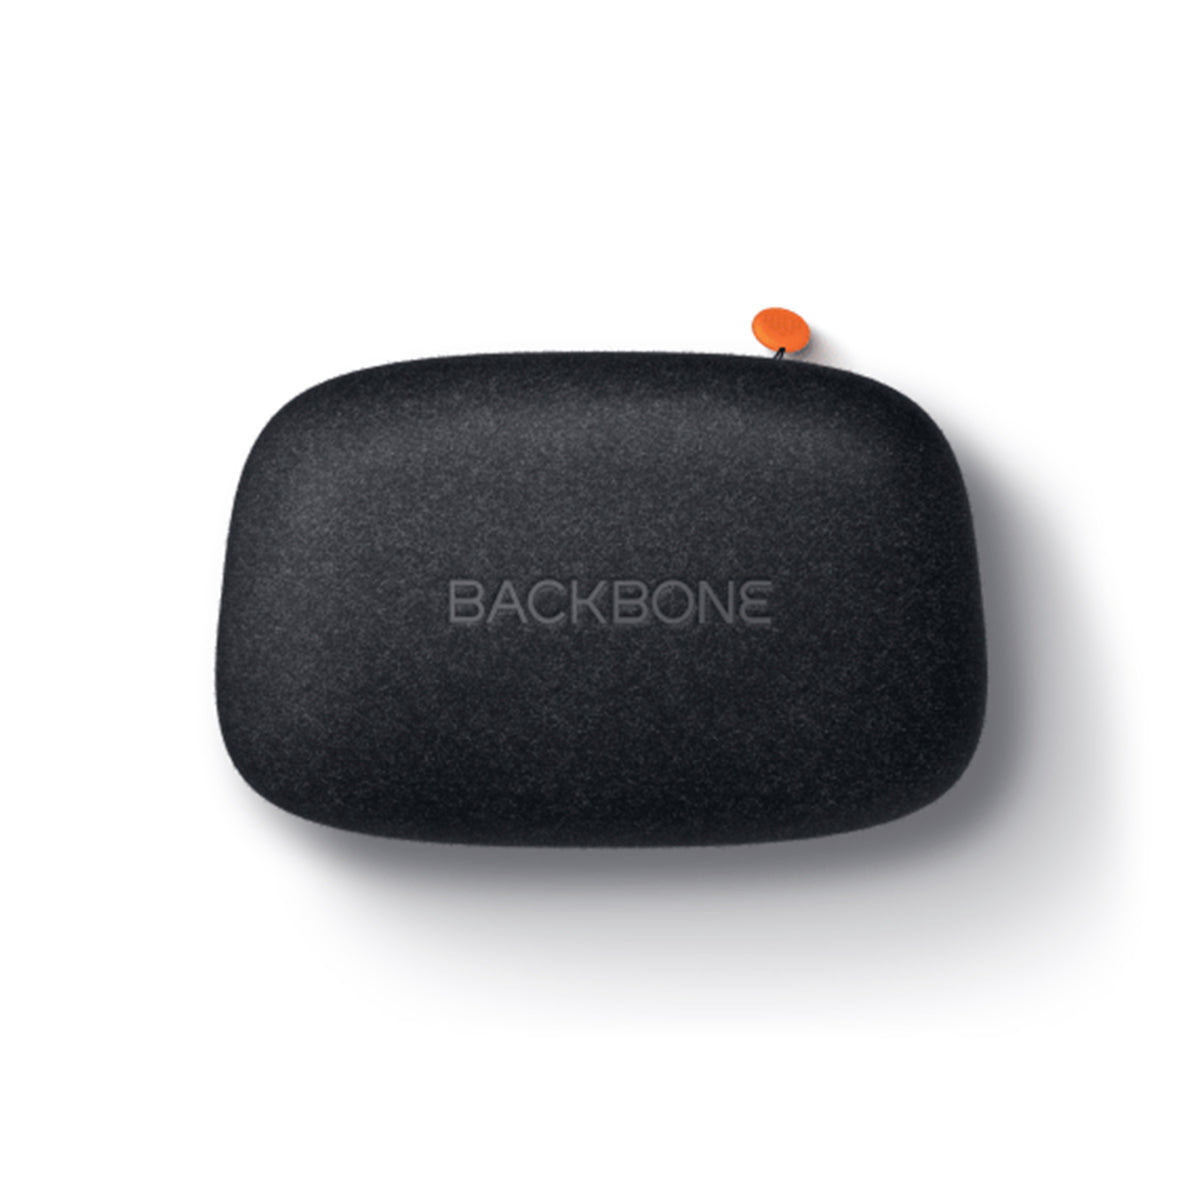 Backbone One for iPhone Xbox Edition